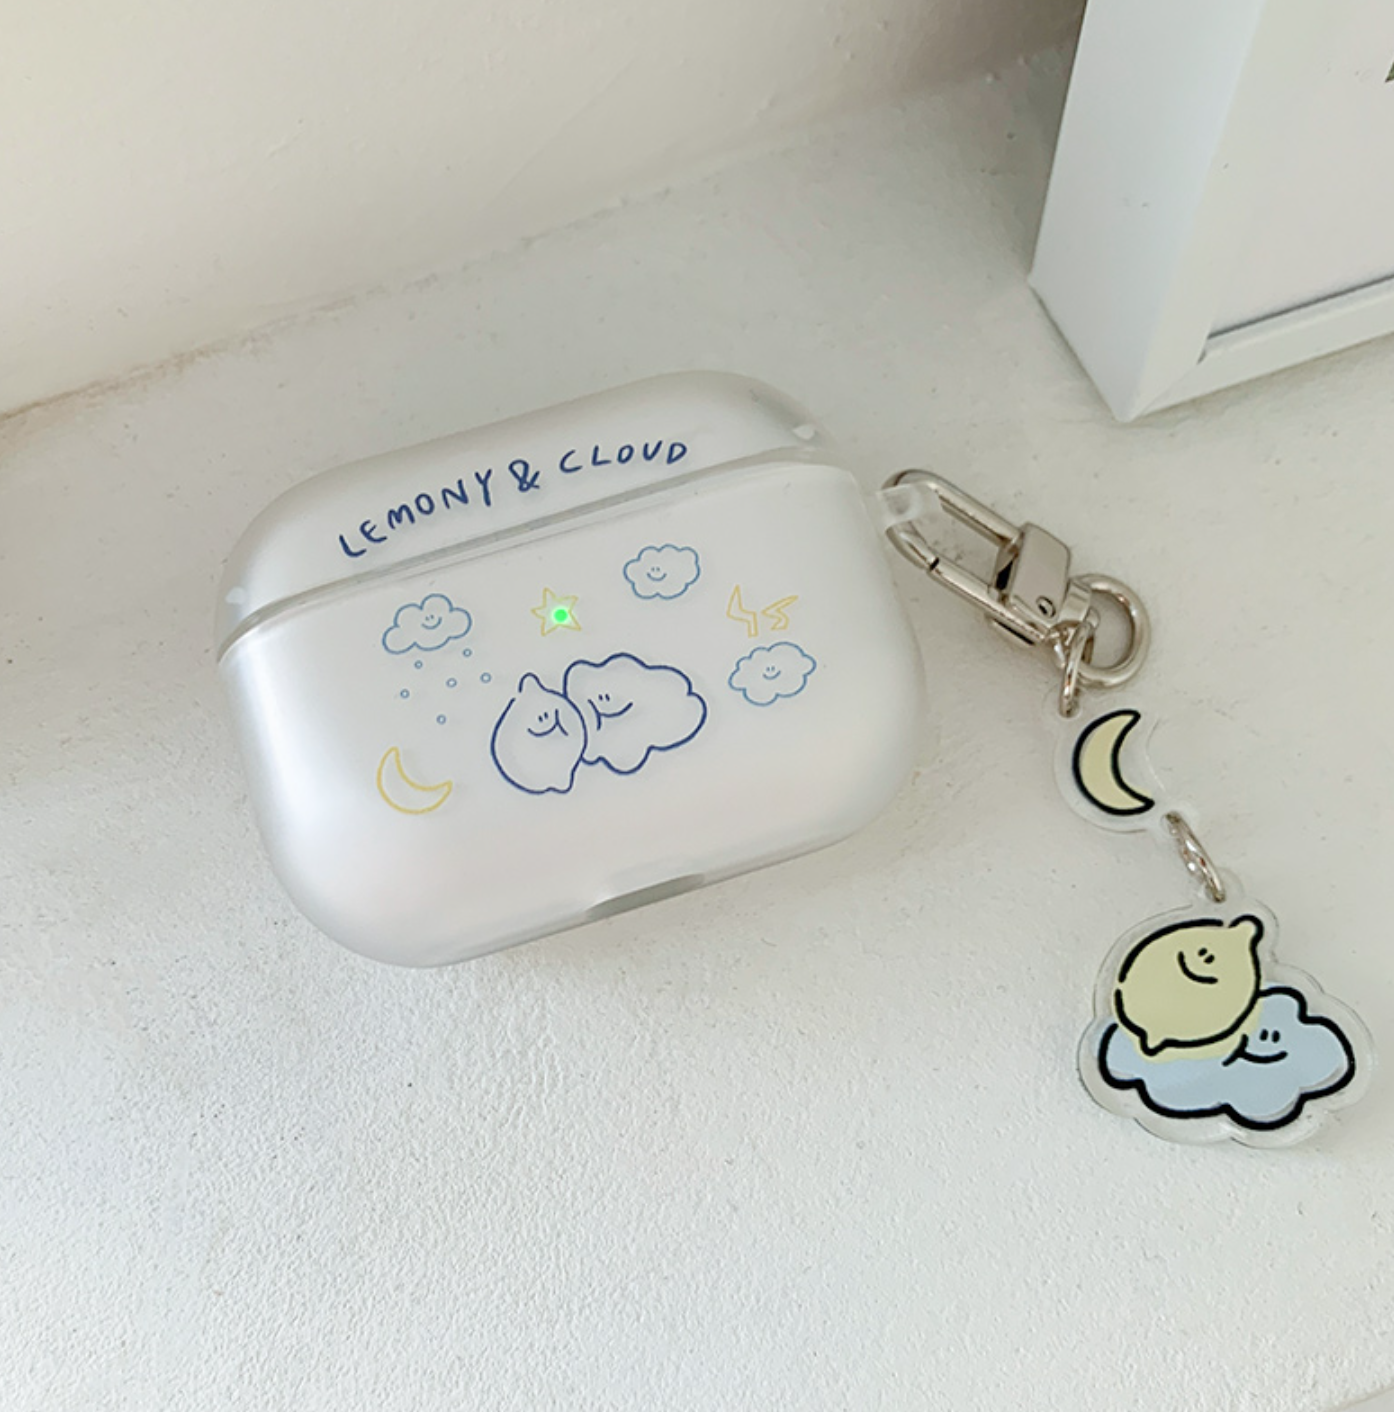 [second morning] Lemony & Cloud AirPods Case